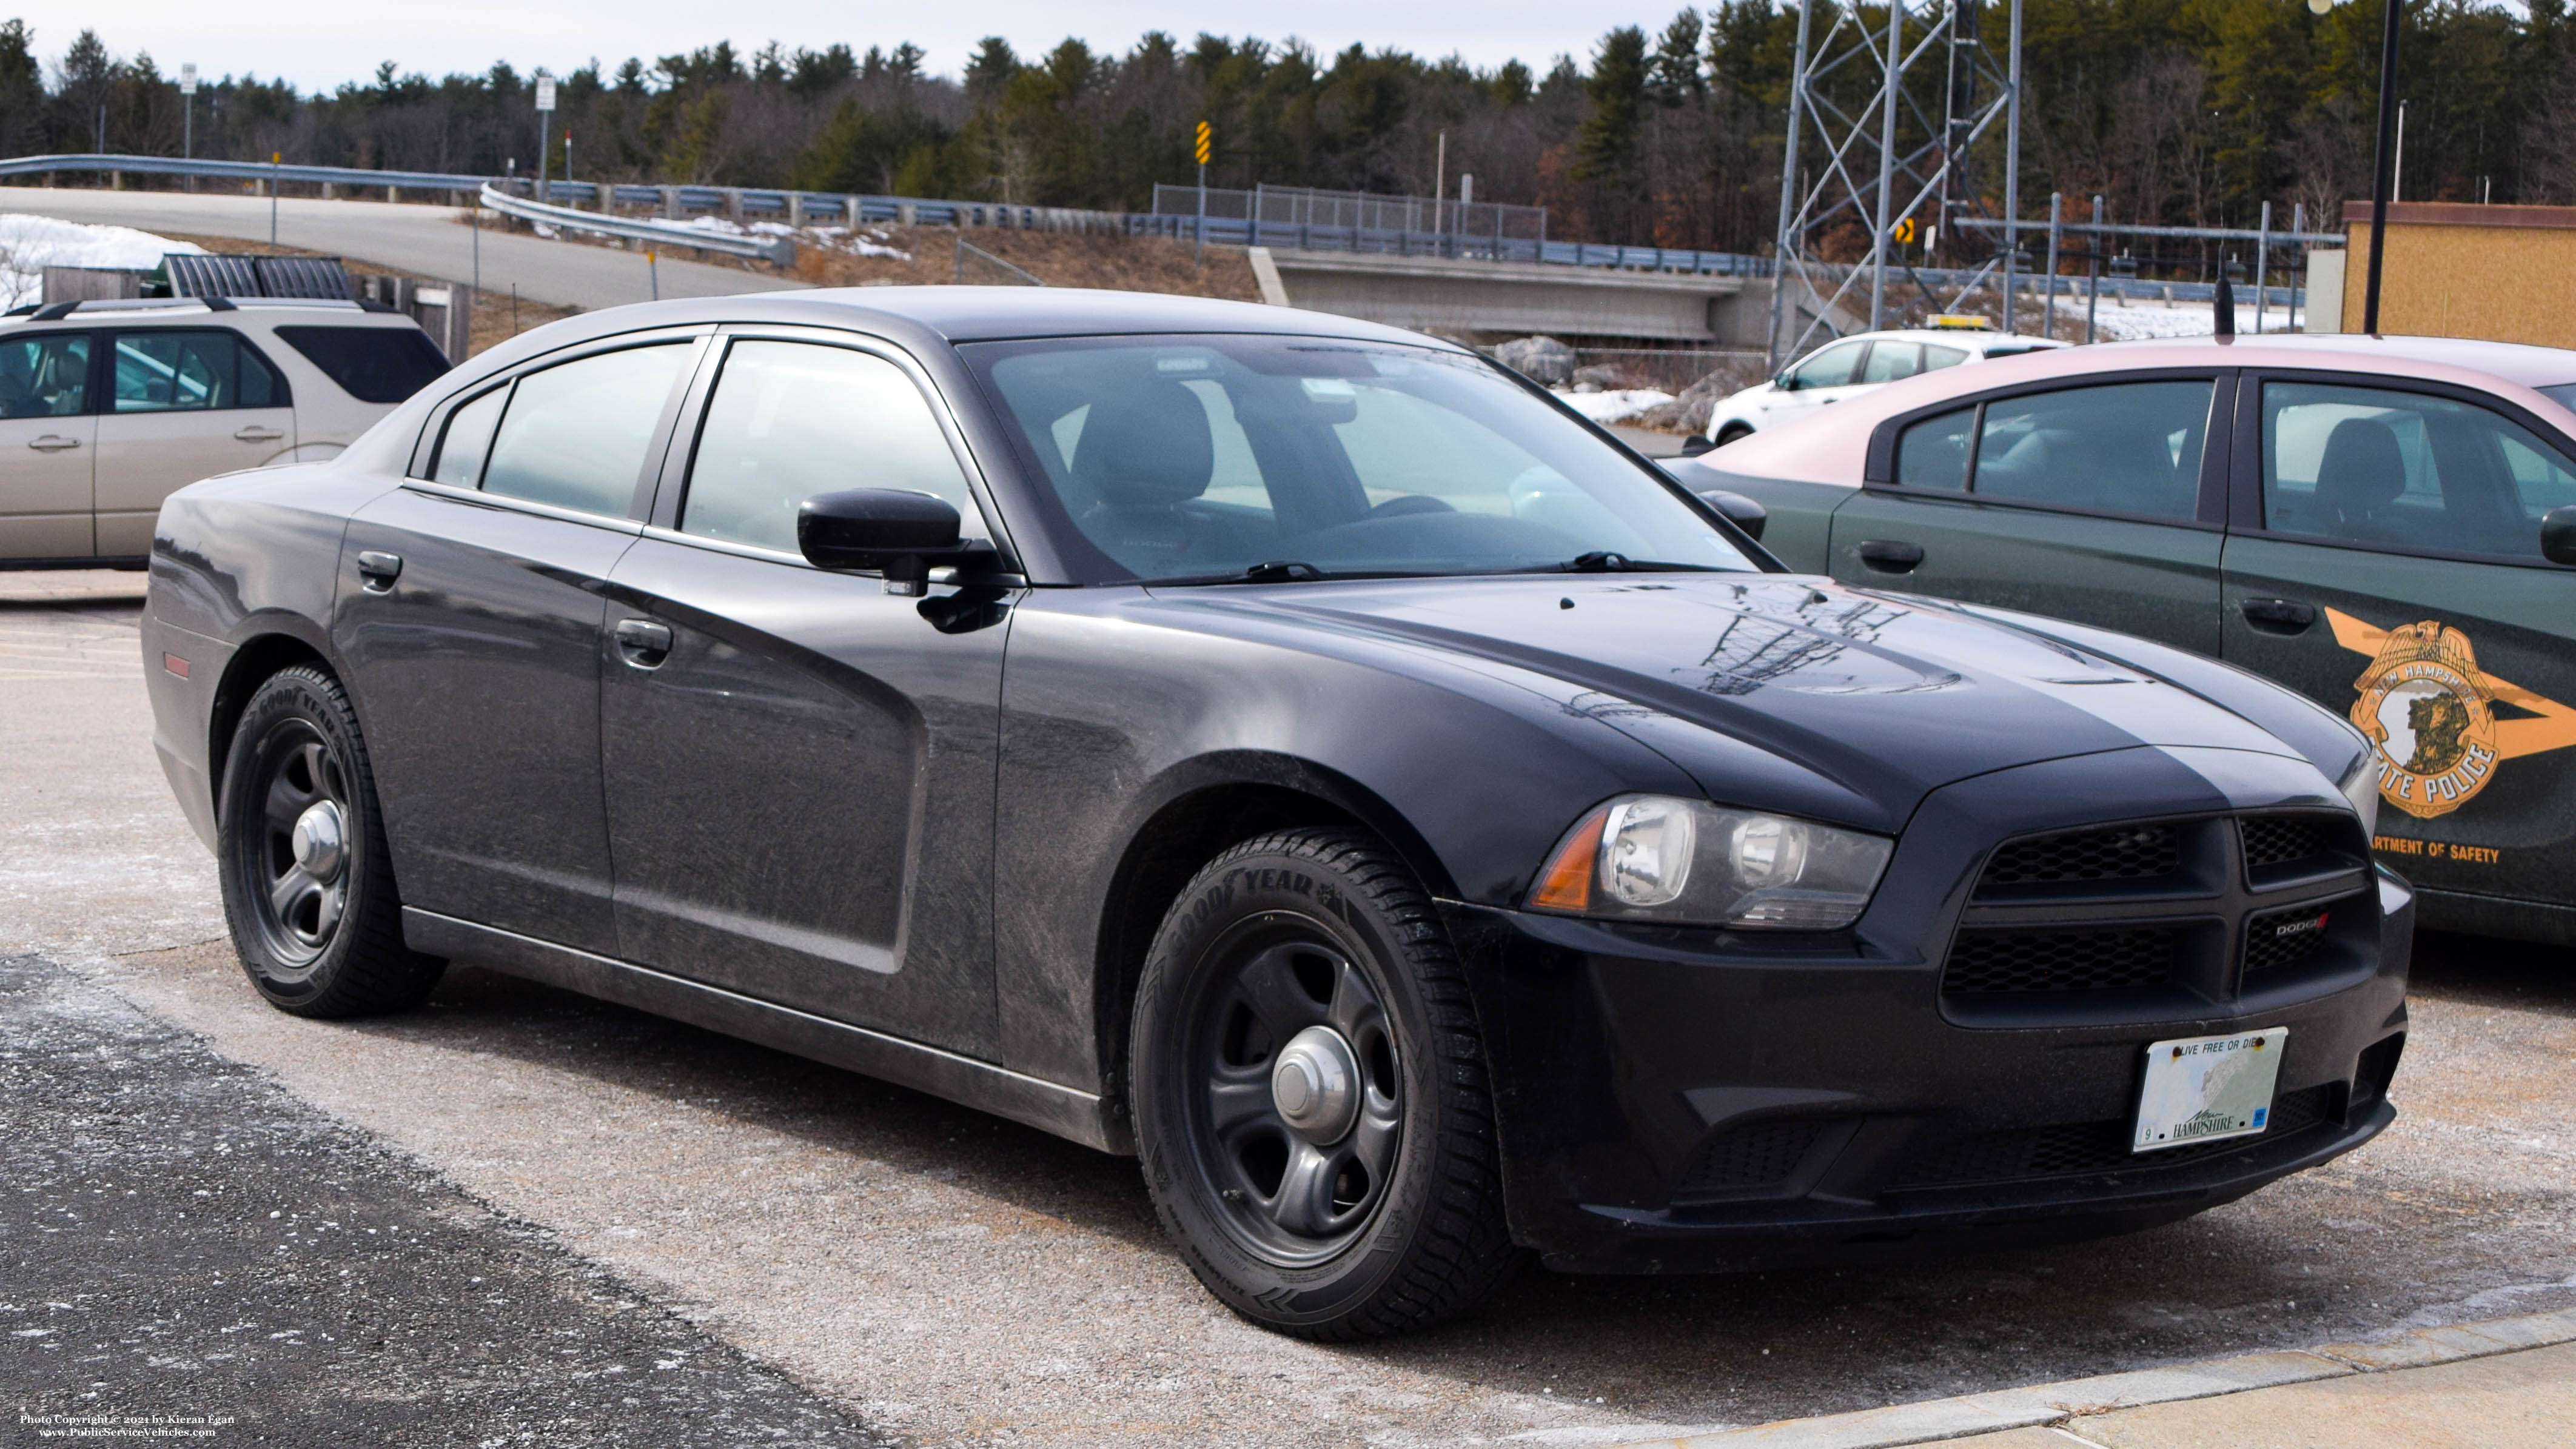 A photo  of New Hampshire State Police
            Cruiser 250, a 2011-2014 Dodge Charger             taken by Kieran Egan